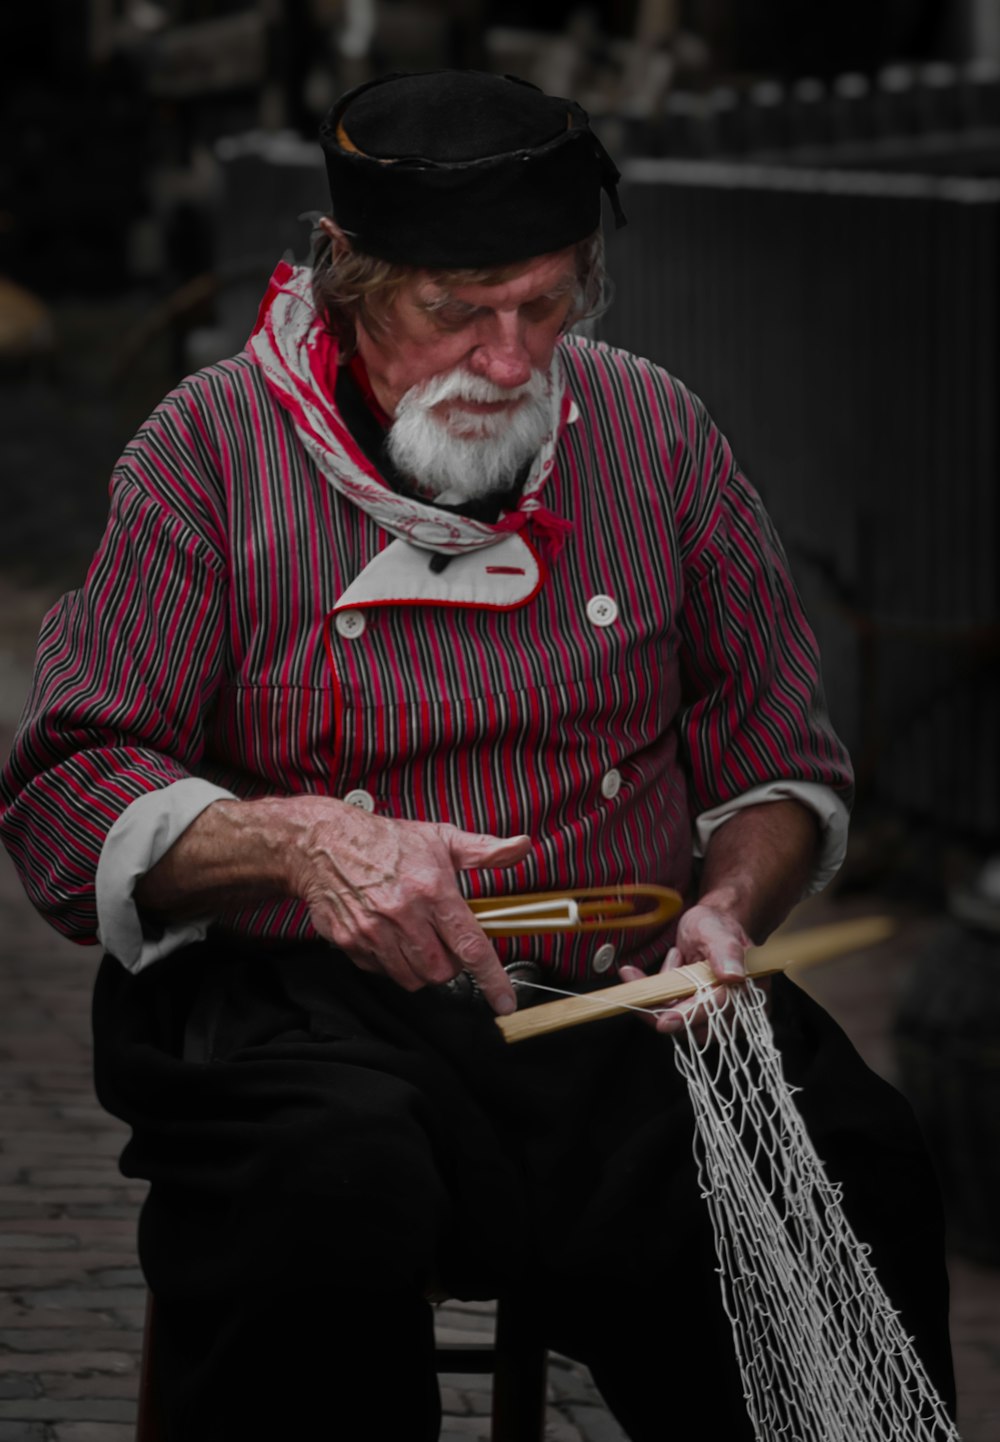 a man sitting on a chair holding a fishing net